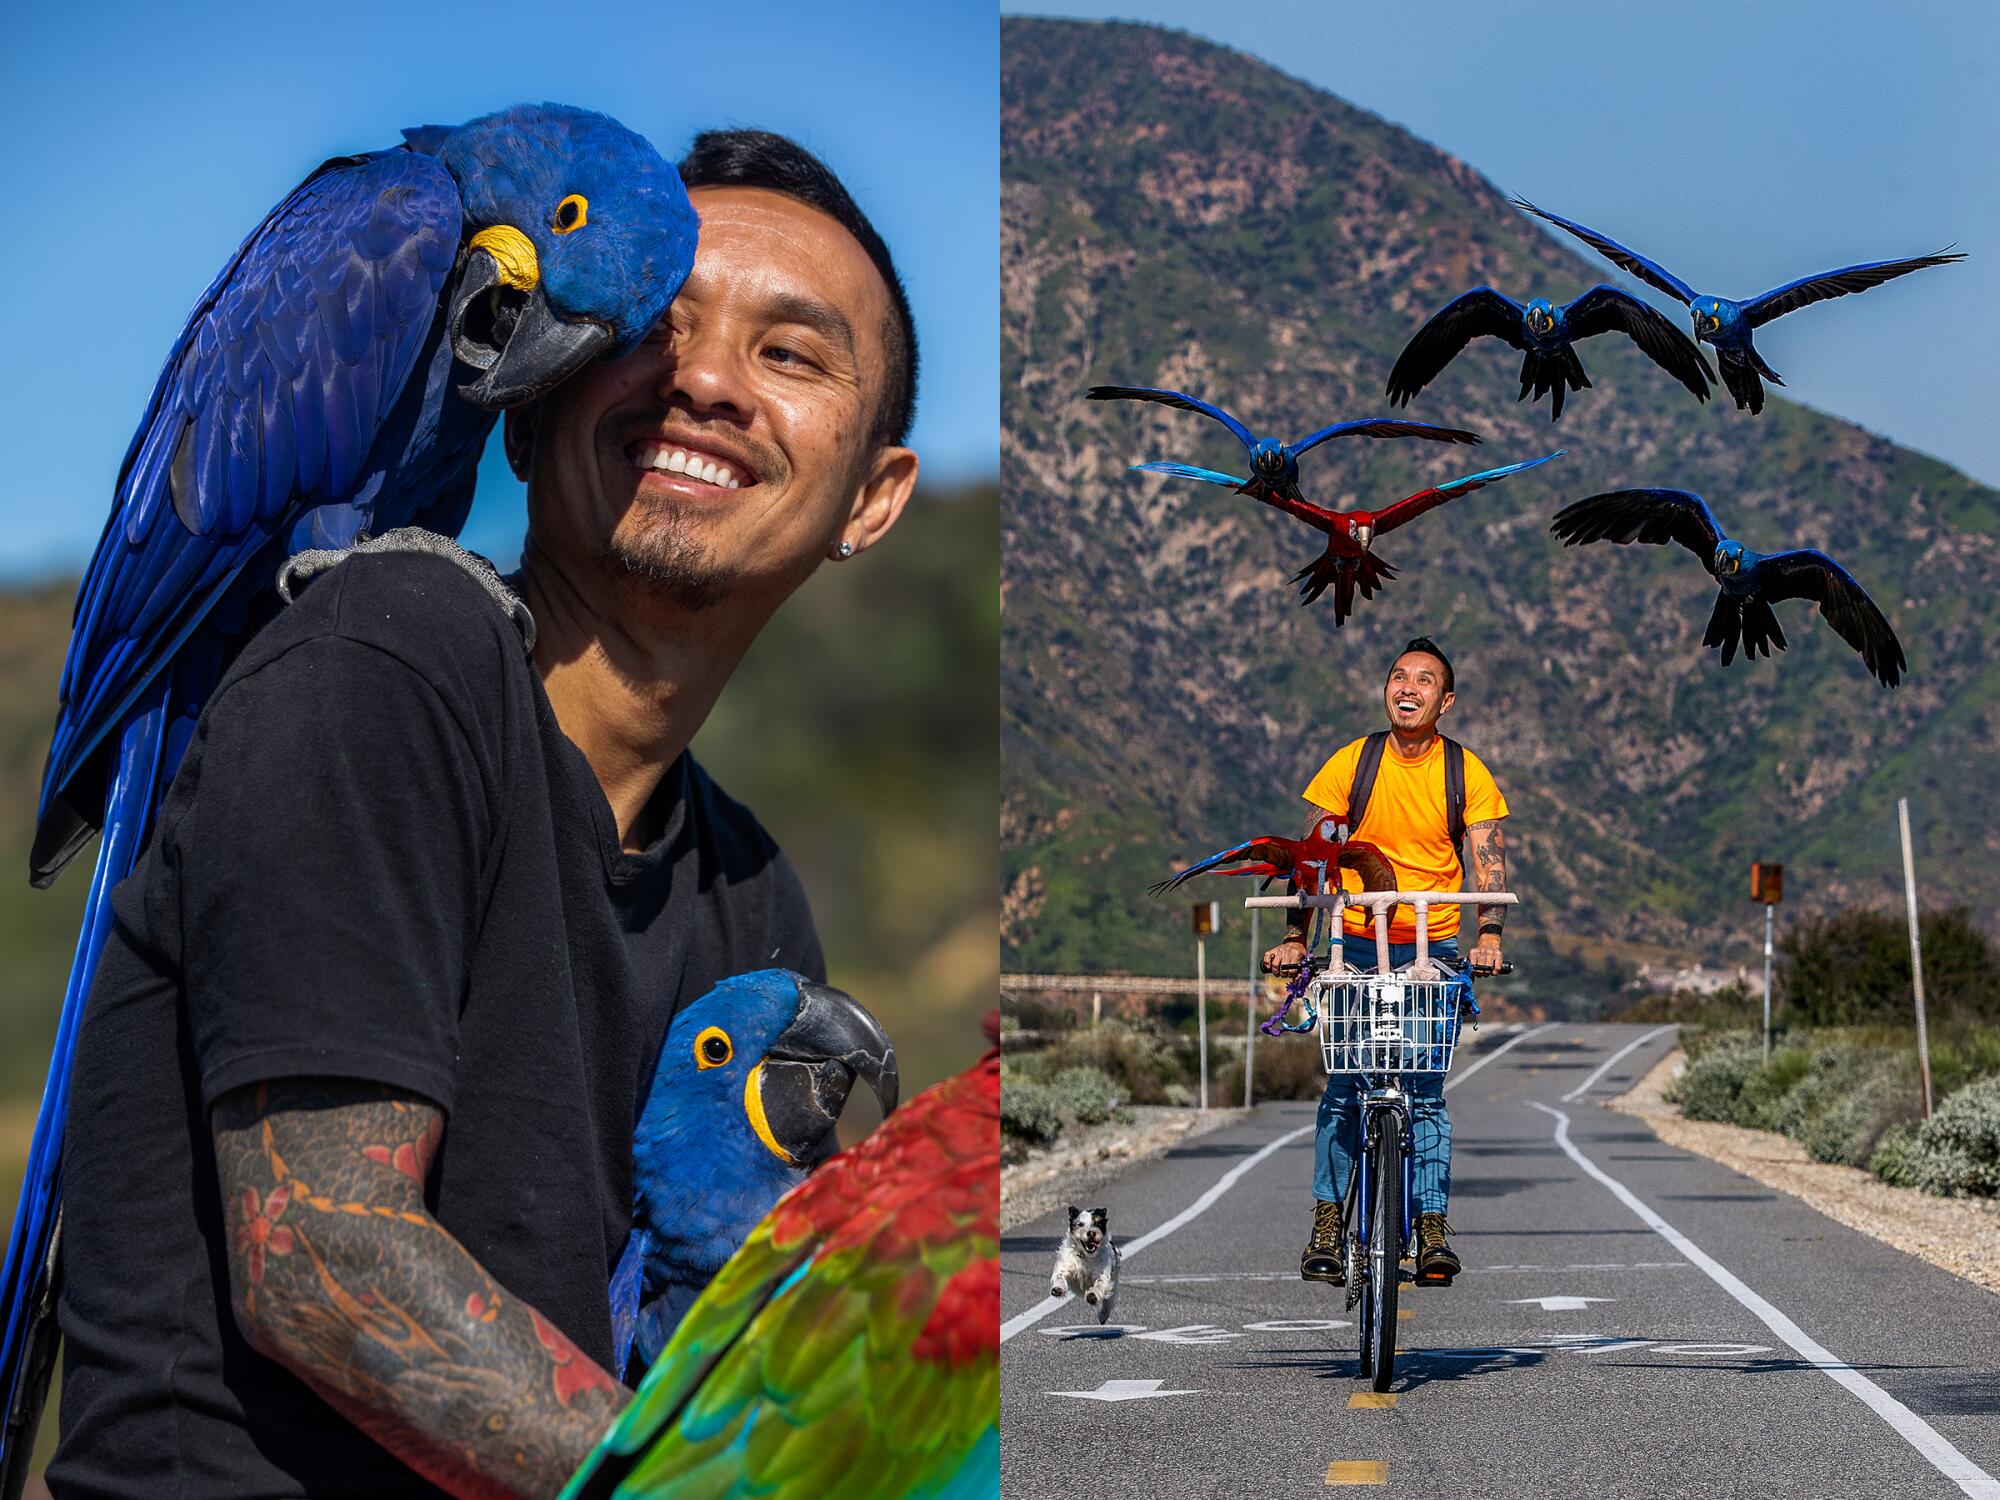 A man holding colorful macaws, left, and riding a bike with a Jack Russell terrier running alongside.